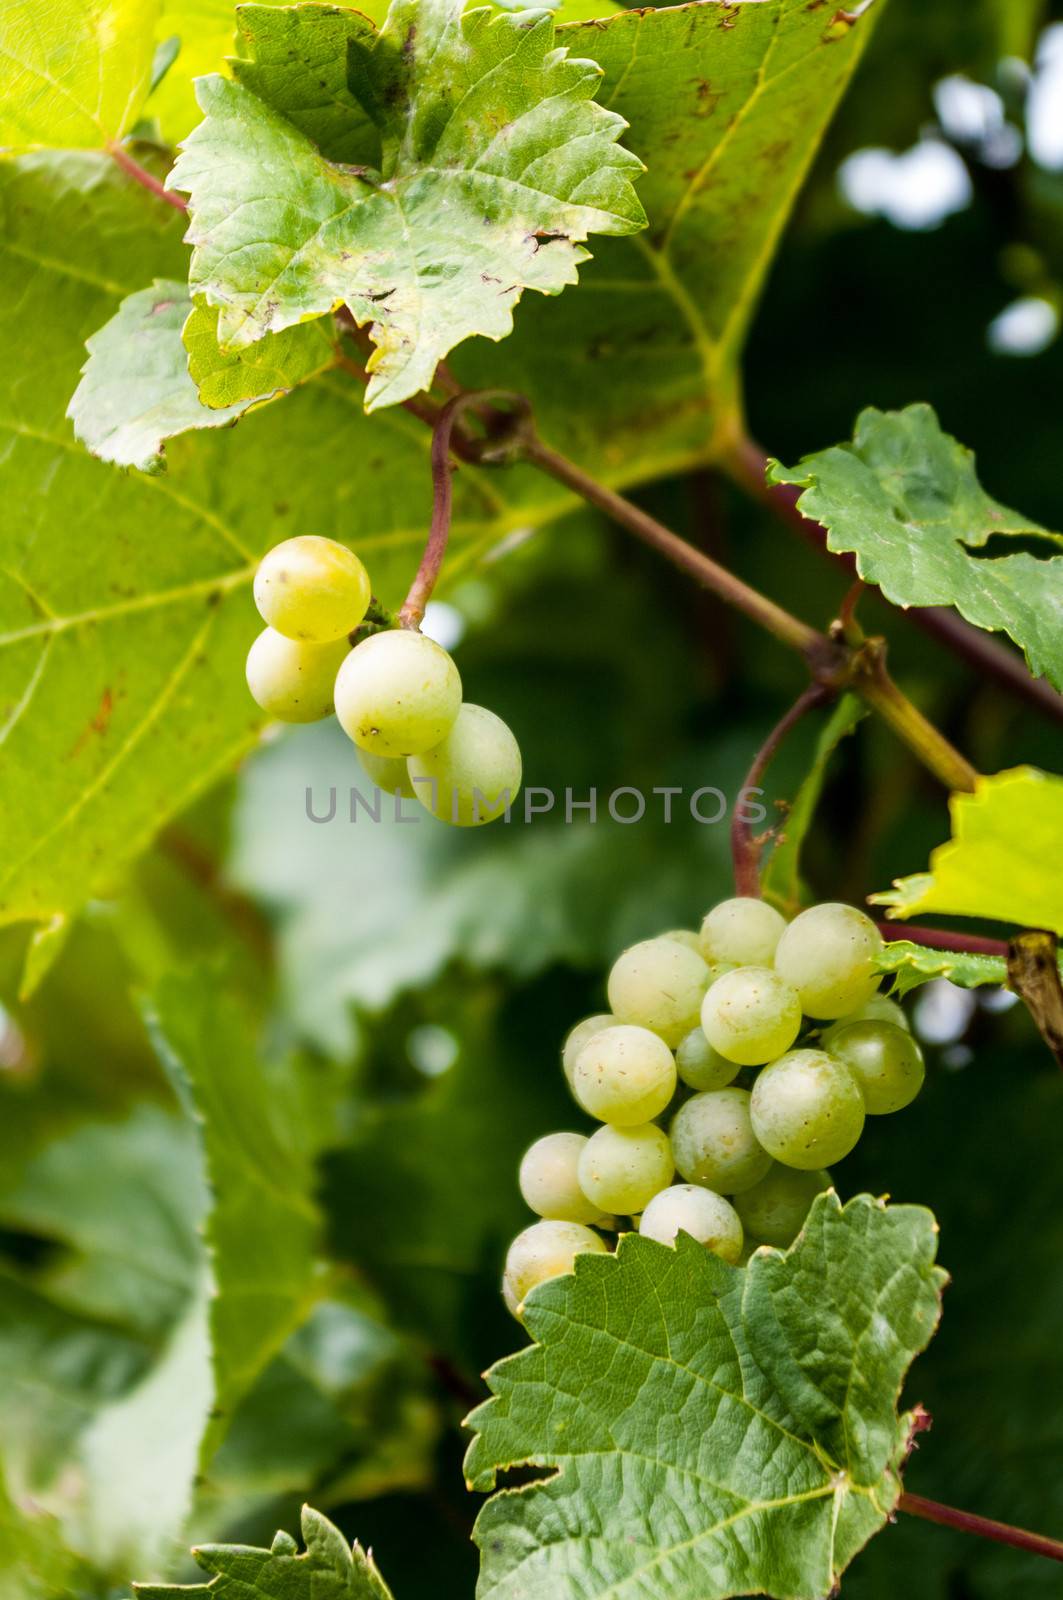 Grapes on the Vine by edcorey